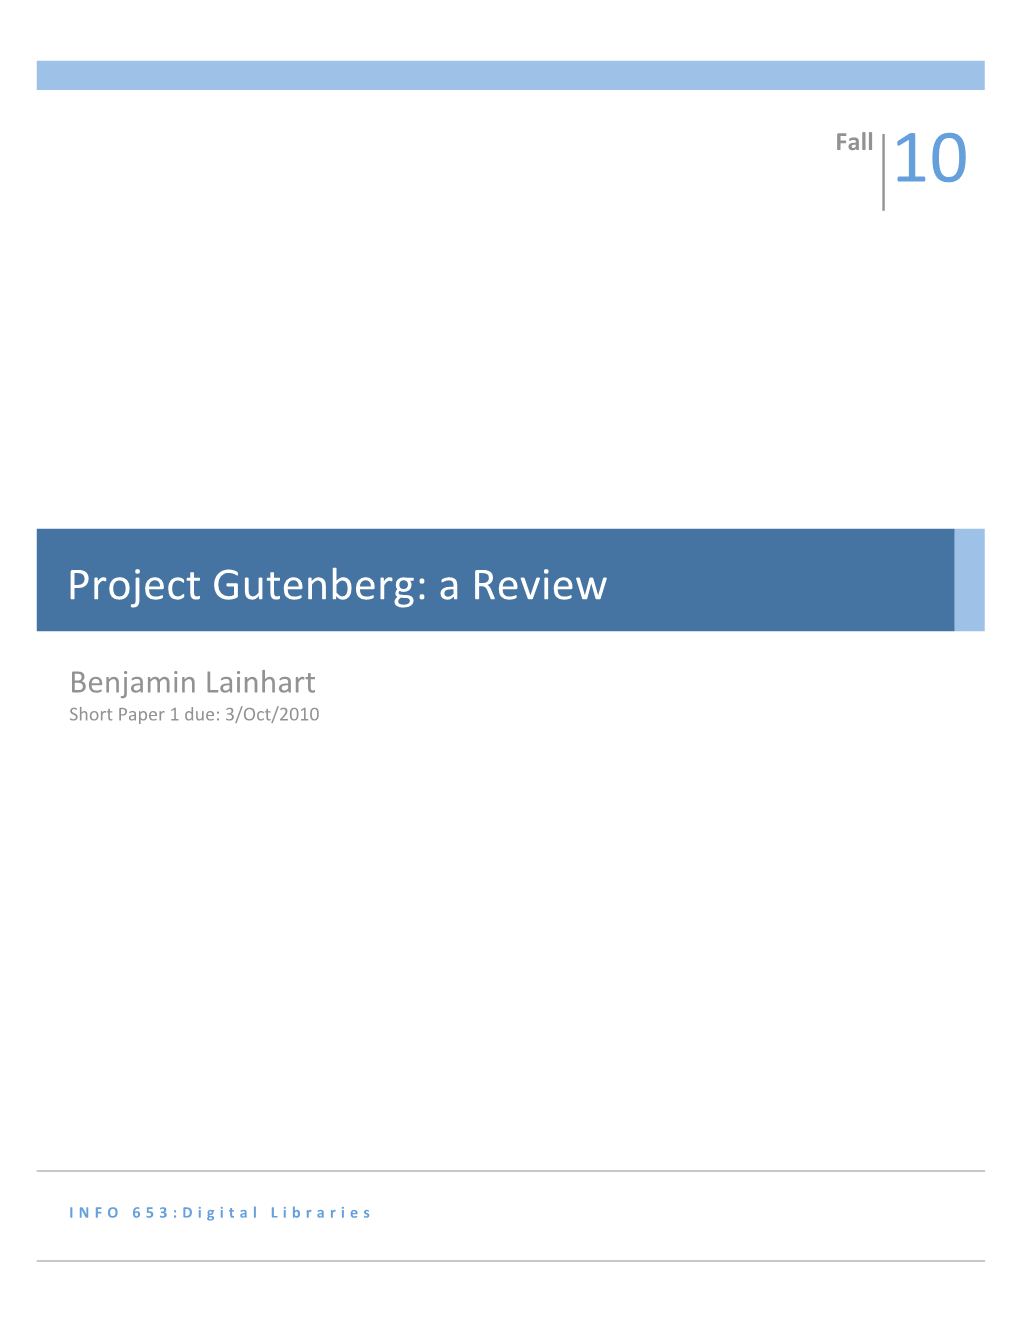 Project Gutenberg: a Review